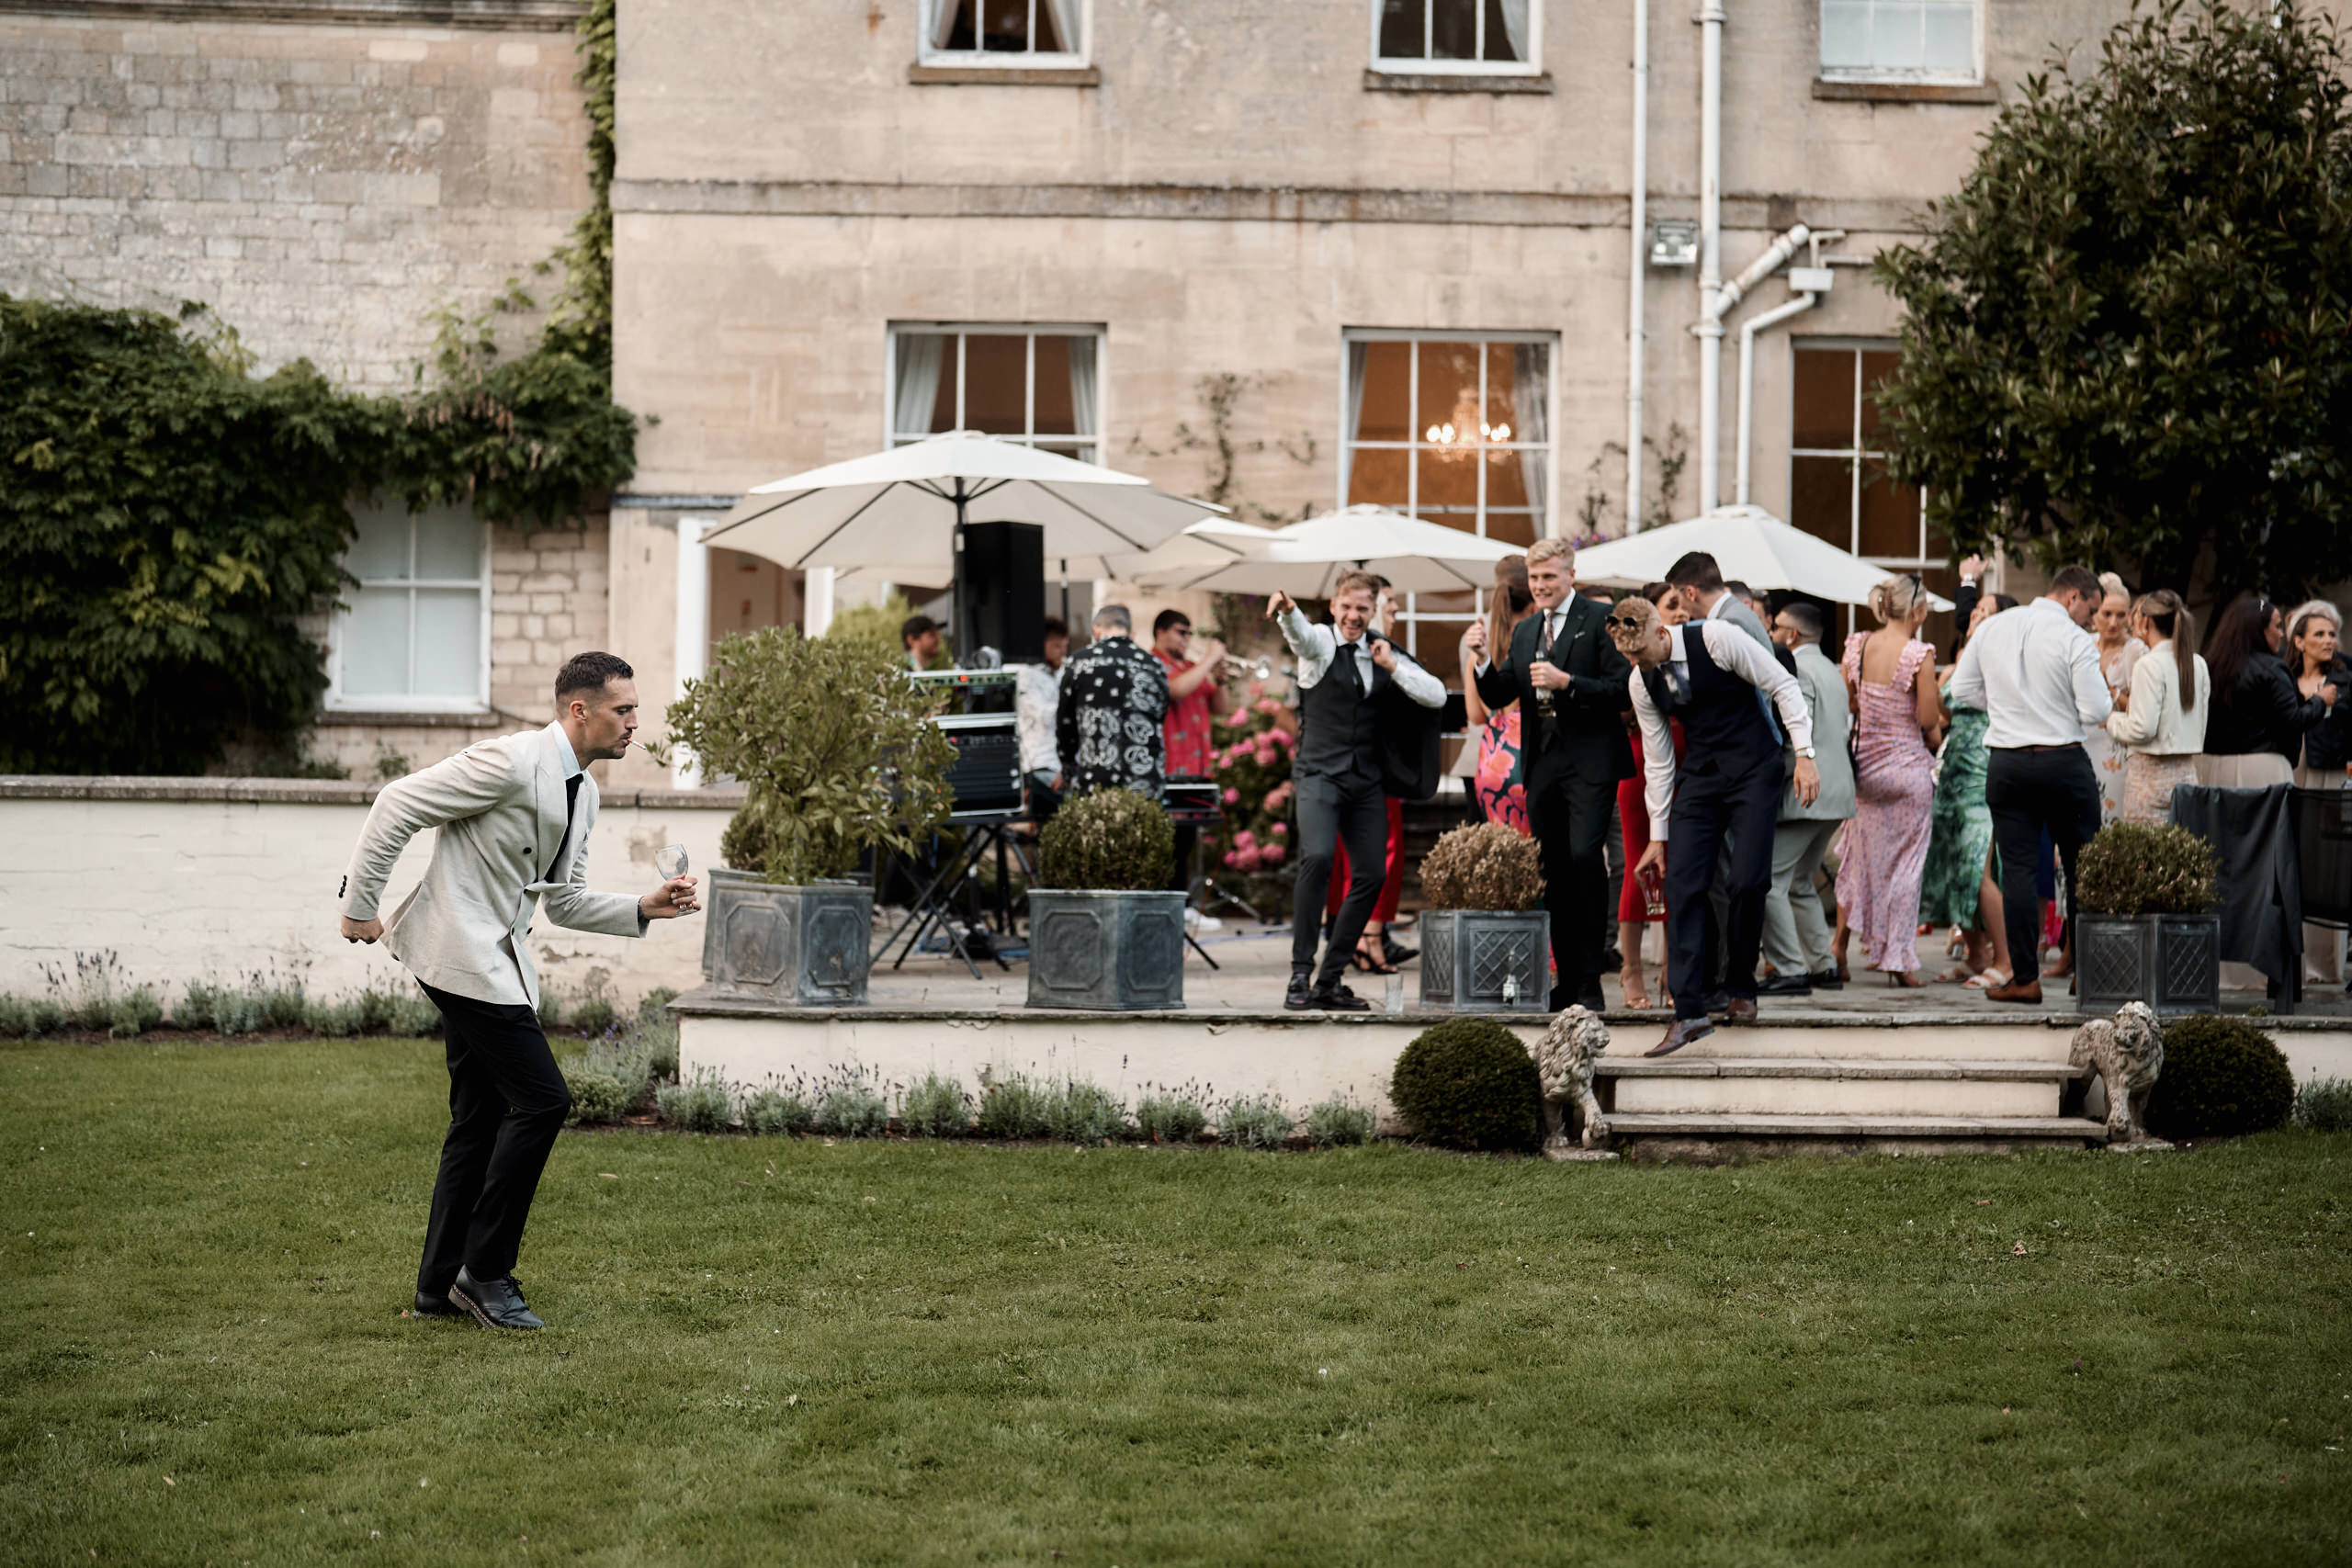 A man in a suit is throwing a frisbee in front of a house.